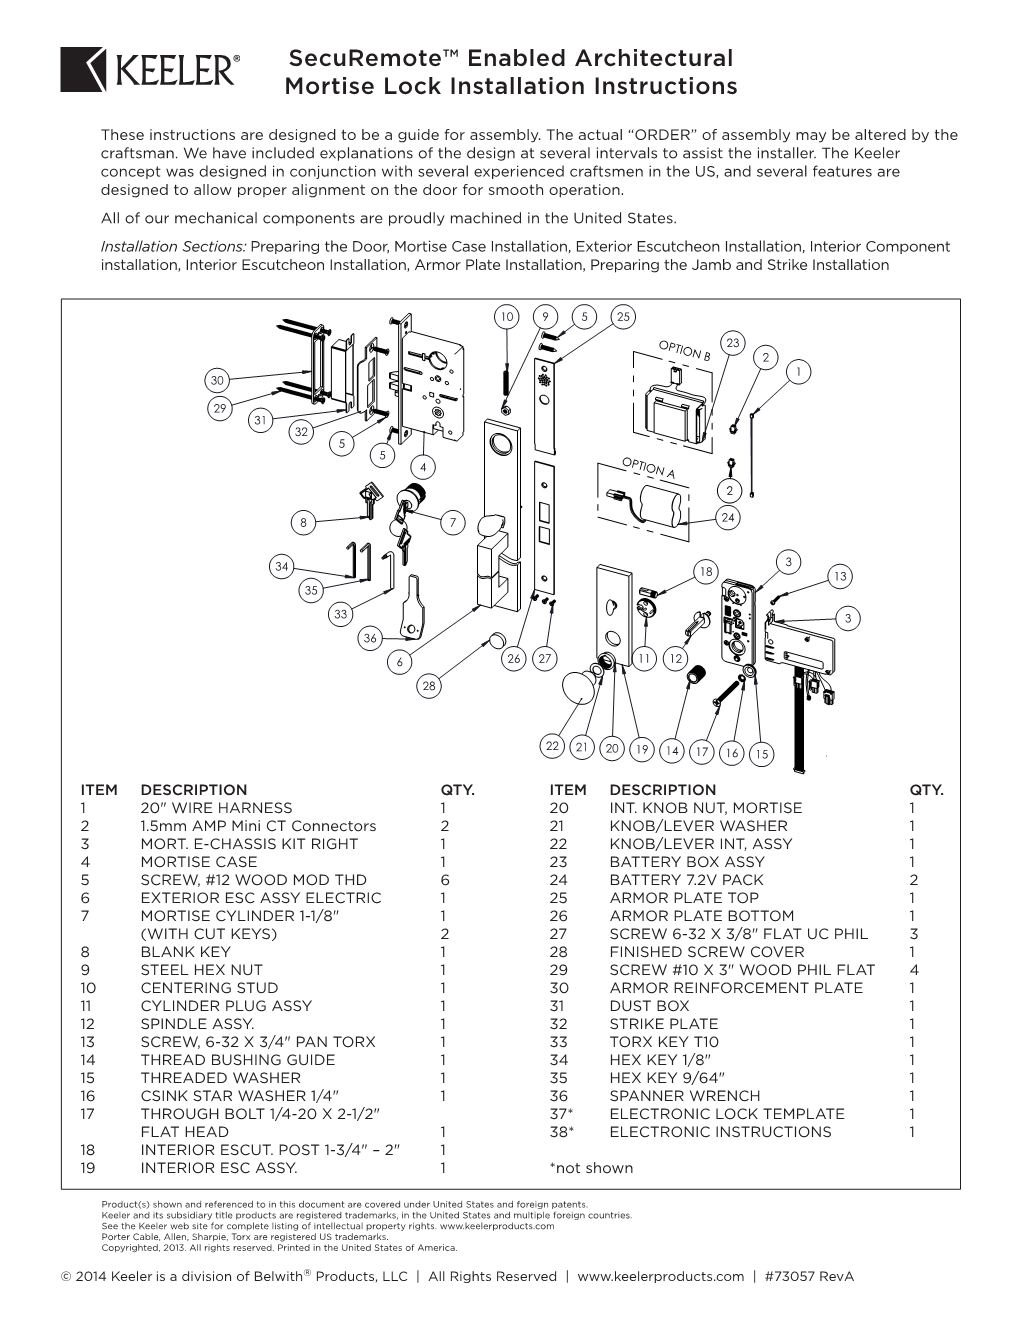 Securemote™ Enabled Architectural Mortise Lock Installation Instructions